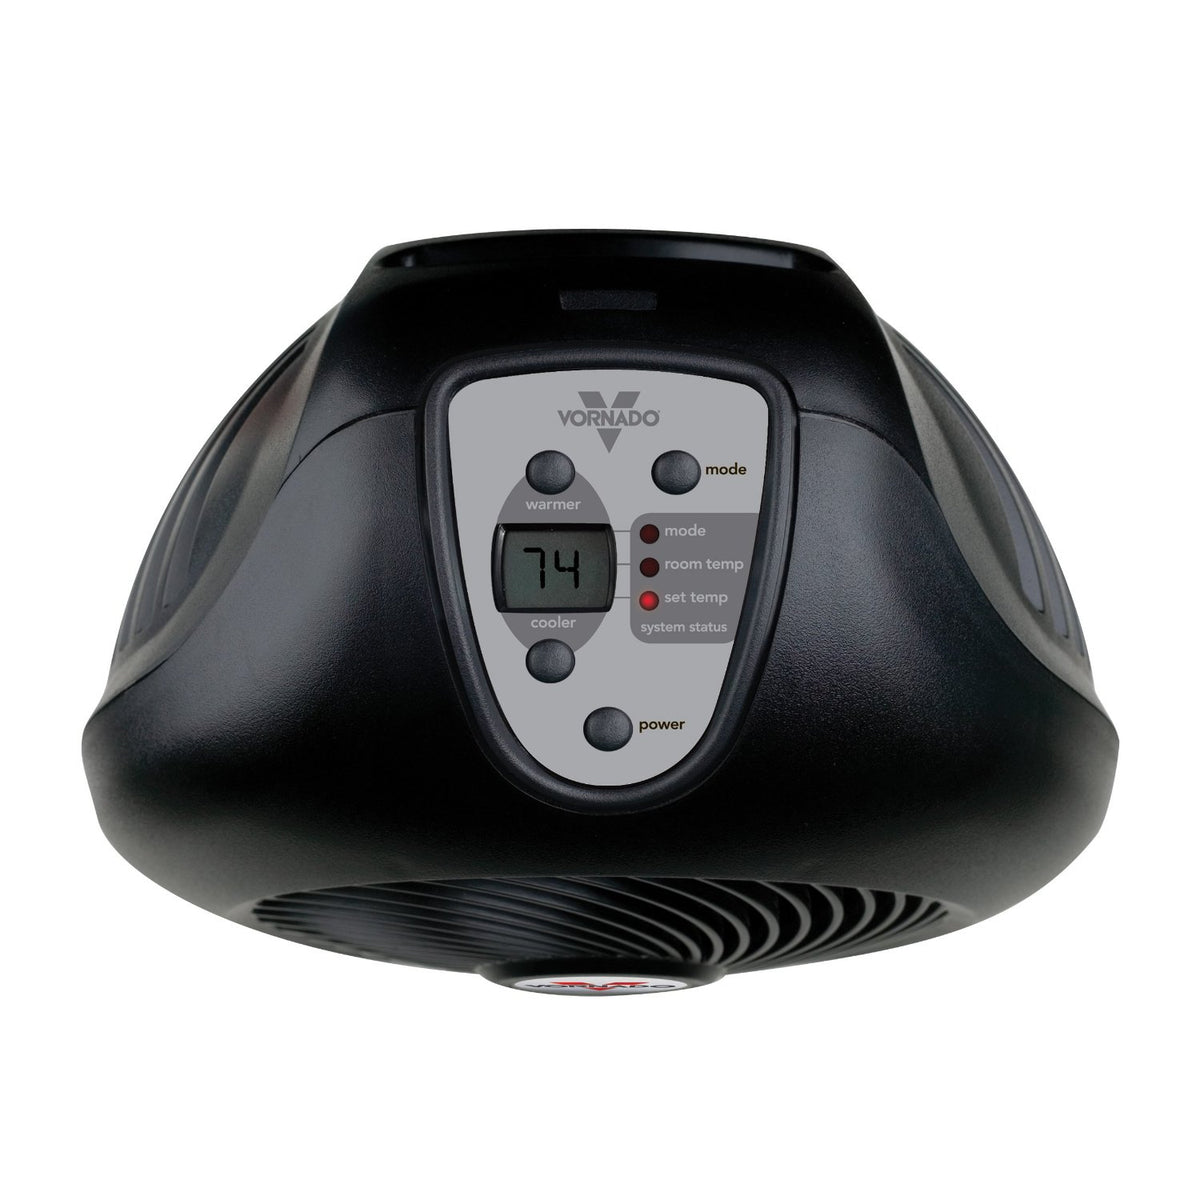 Buy vornado dvth whole room heater - Online store for heaters, fan-forced in USA, on sale, low price, discount deals, coupon code